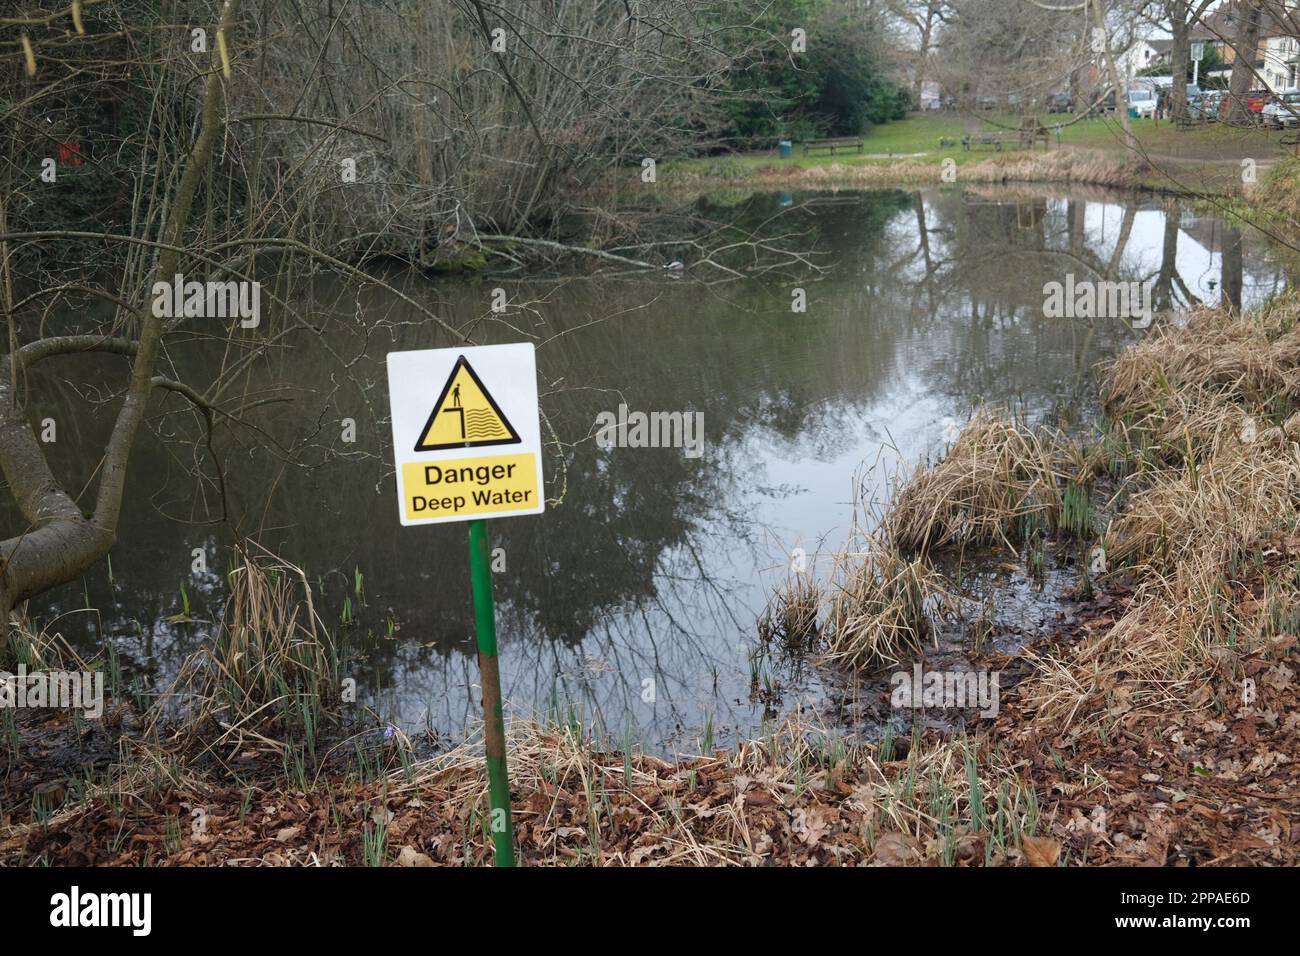 A warning sign advising people to take care near a deep water pond in the village of Letchmore Heath Hertfordshire. Watch your kids!! Stock Photo